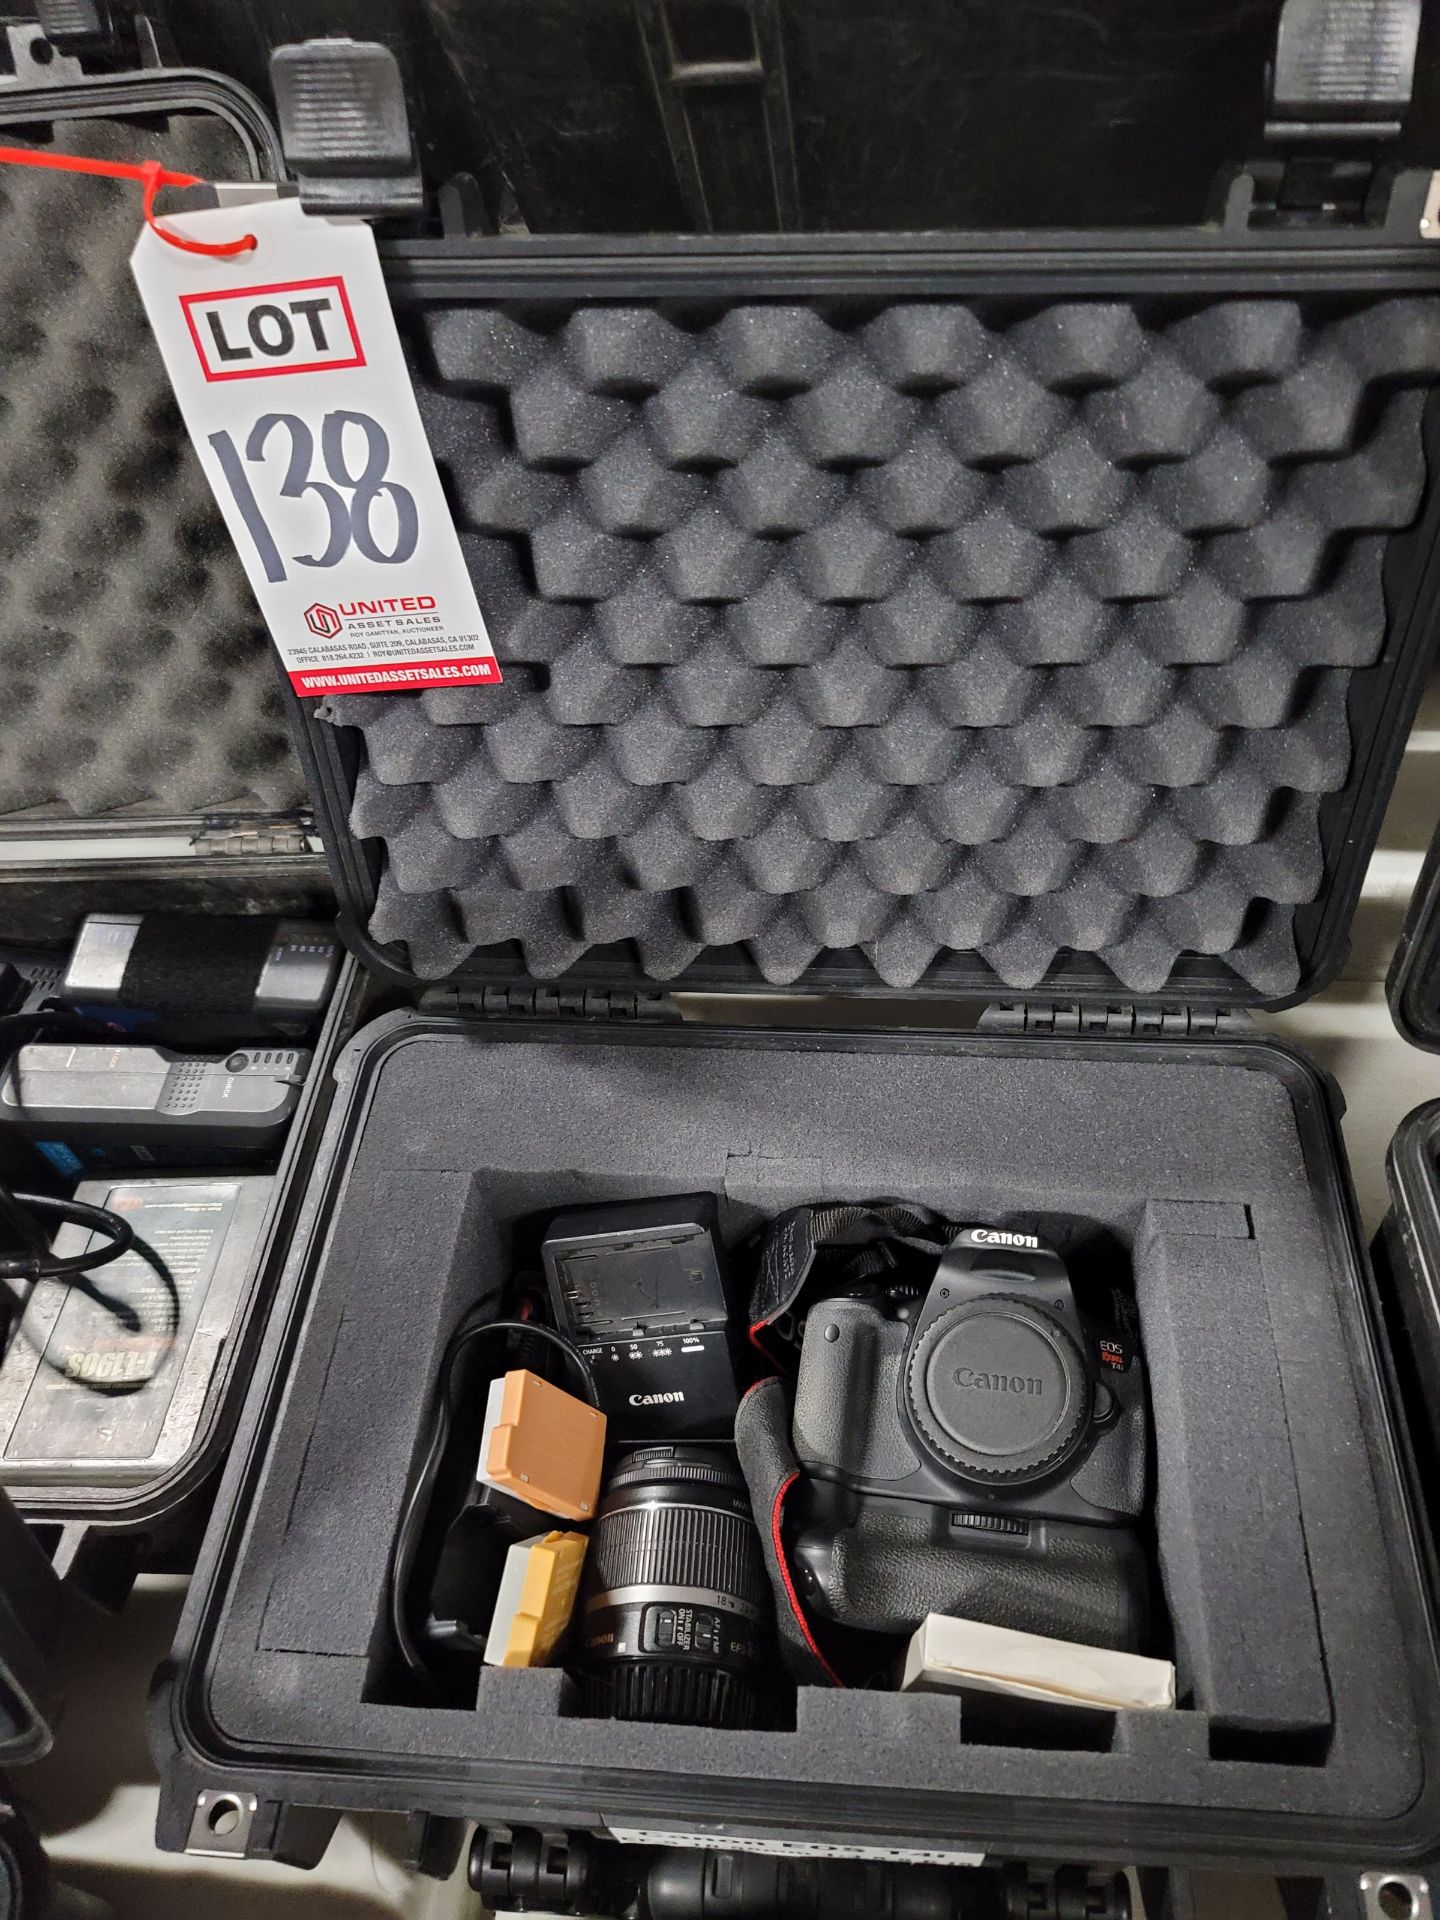 CANON EOS REBEL T4i CAMERA, W/ EFS 18-55MM LENS, (2) BATTERY PACKS AND CHARGER, W/ PELICAN CASE